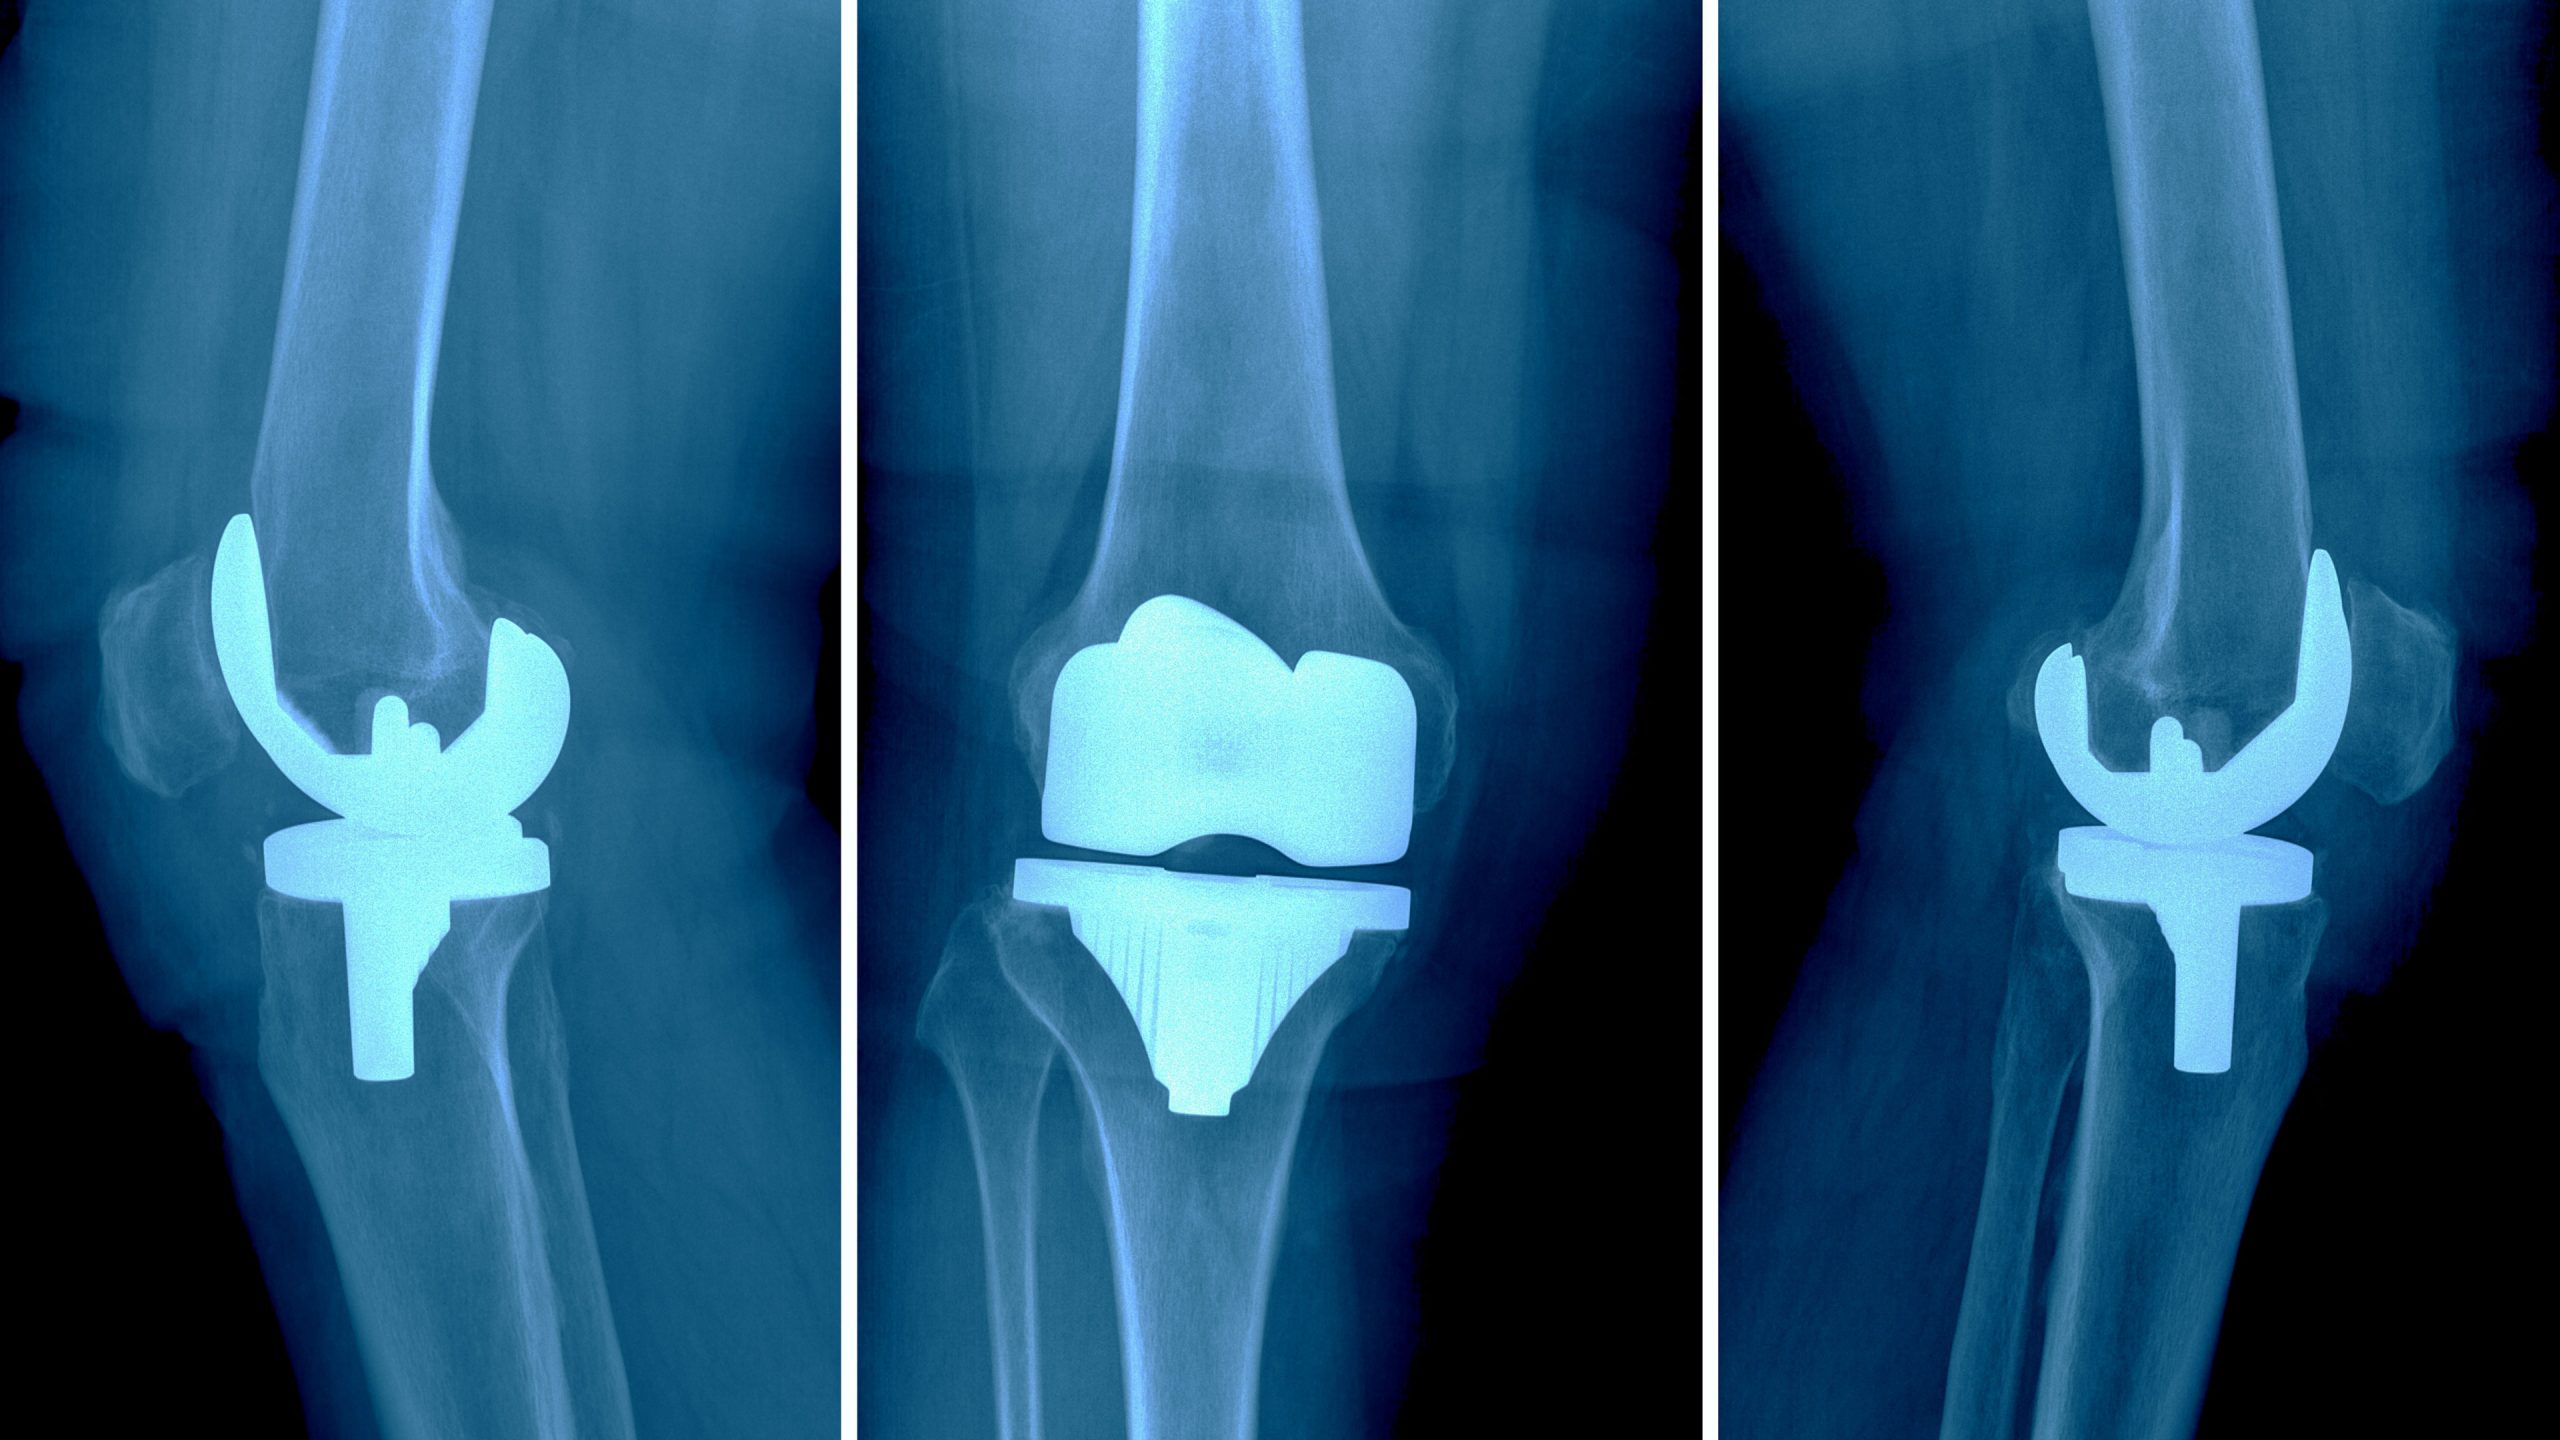 Knee Replacement Complications | Problems After Knee Surgery